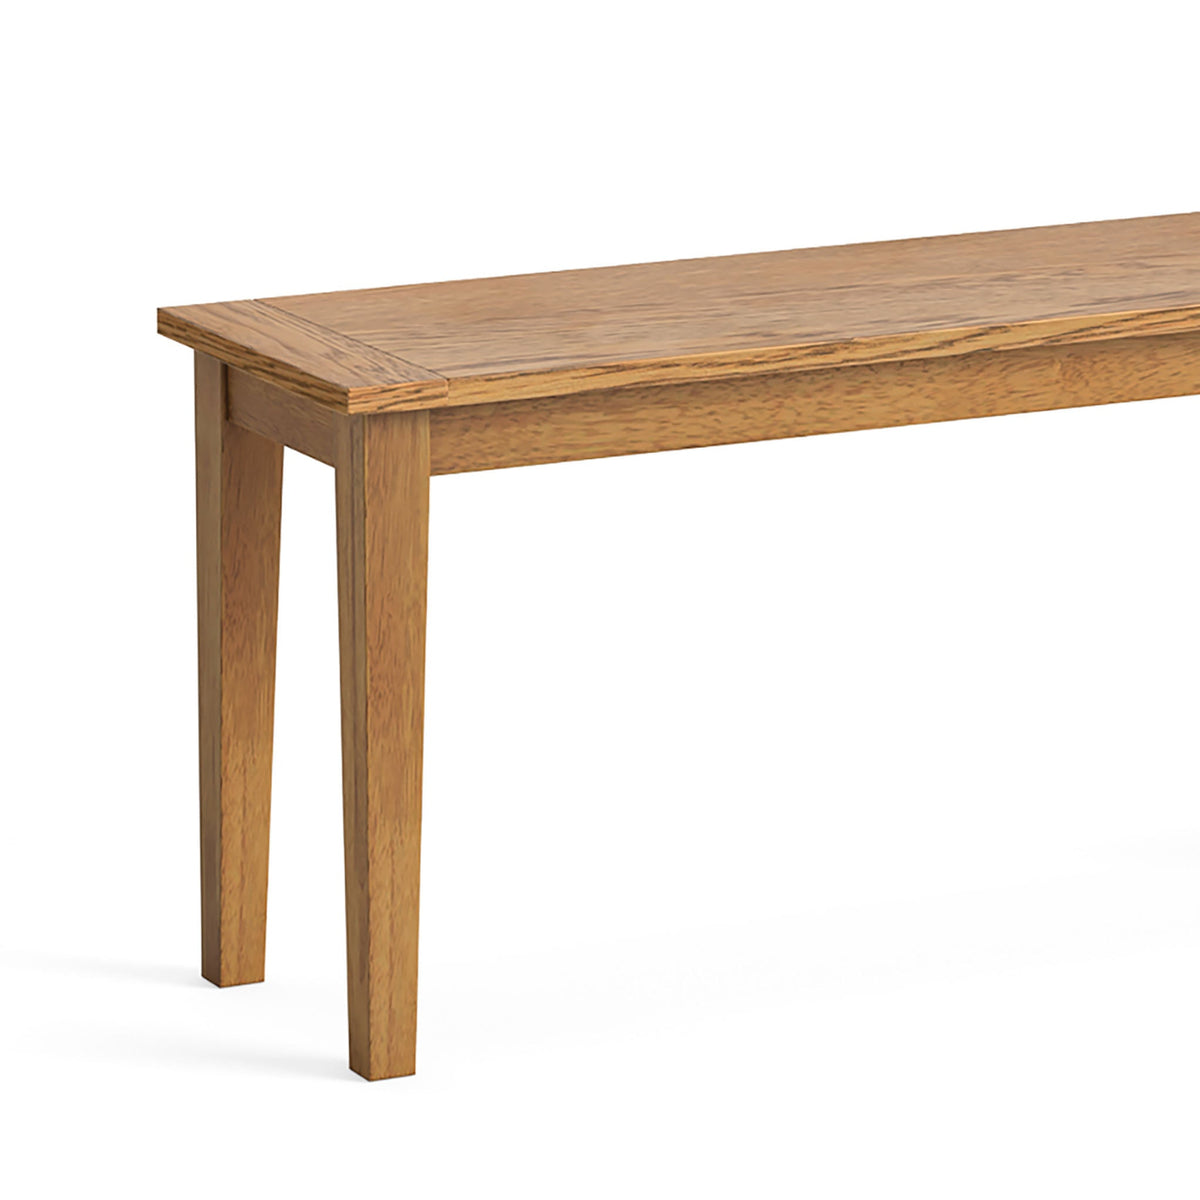 Fran Oak 120cm Large Dining Bench close up of the wooden seat